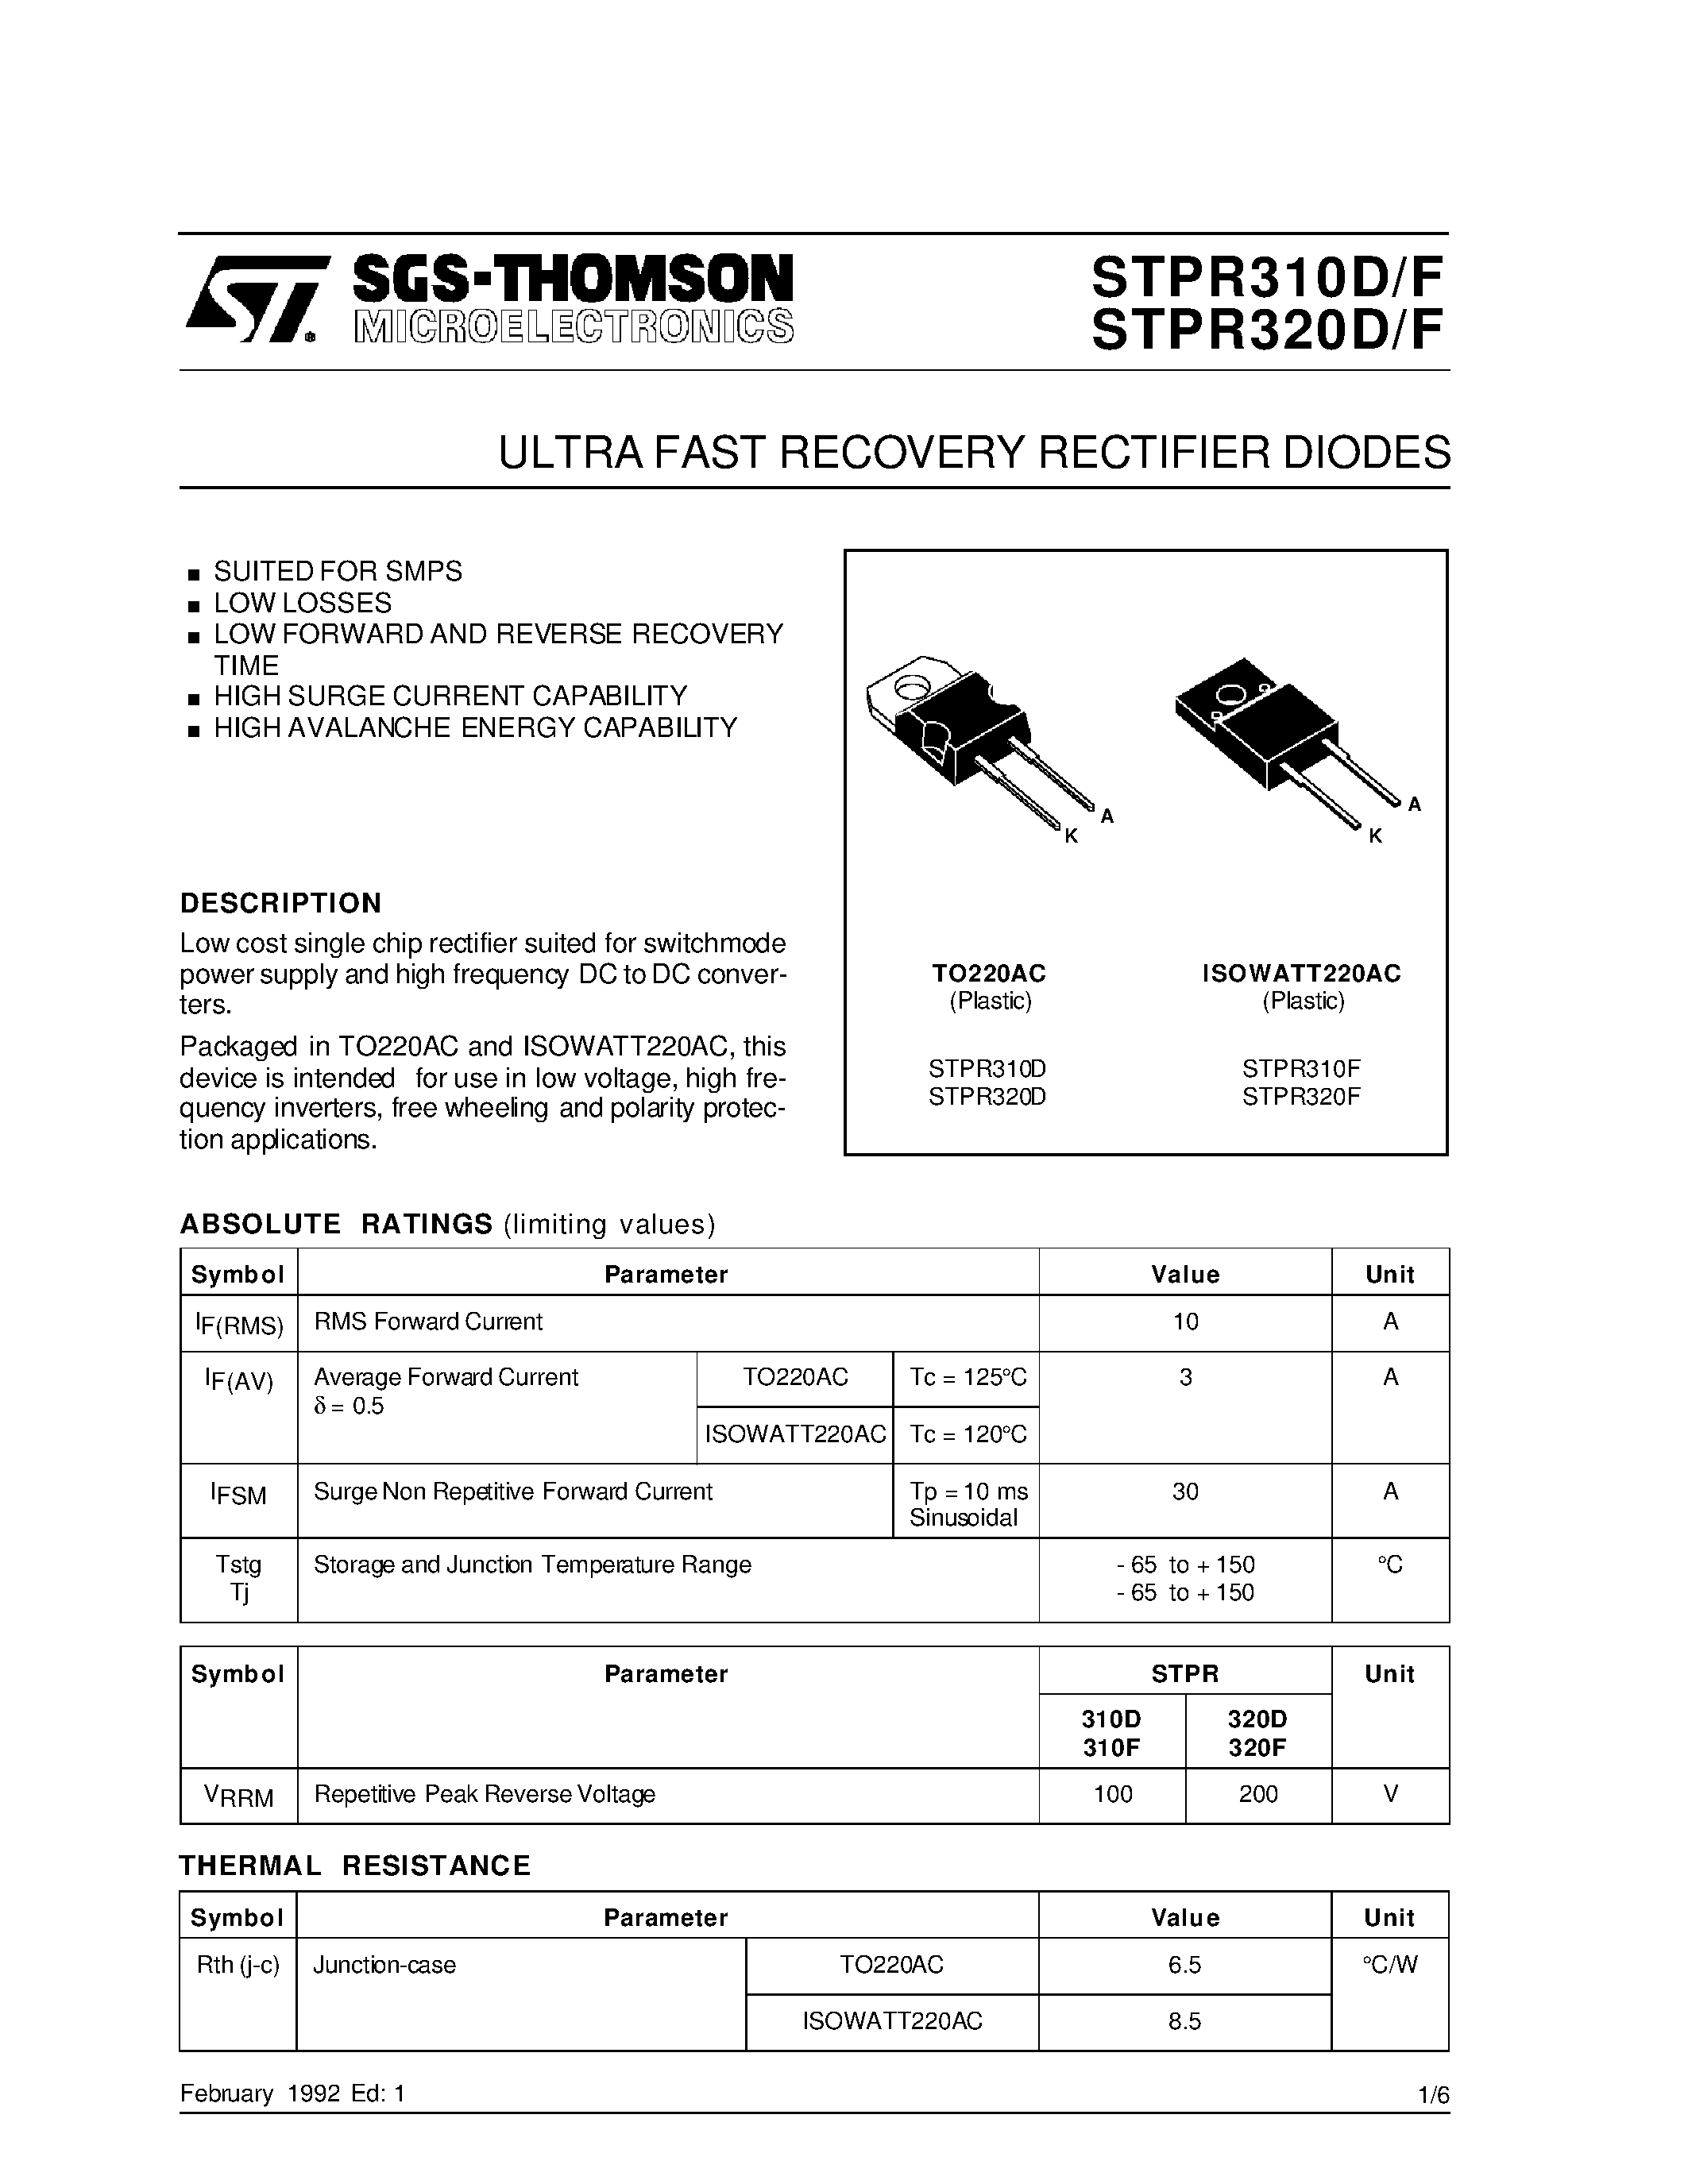 Даташит STPR310D - (STPR310D/F - STPR320D/F) ULTRA FAST RECOVERY RECTIFIER DIODES страница 1